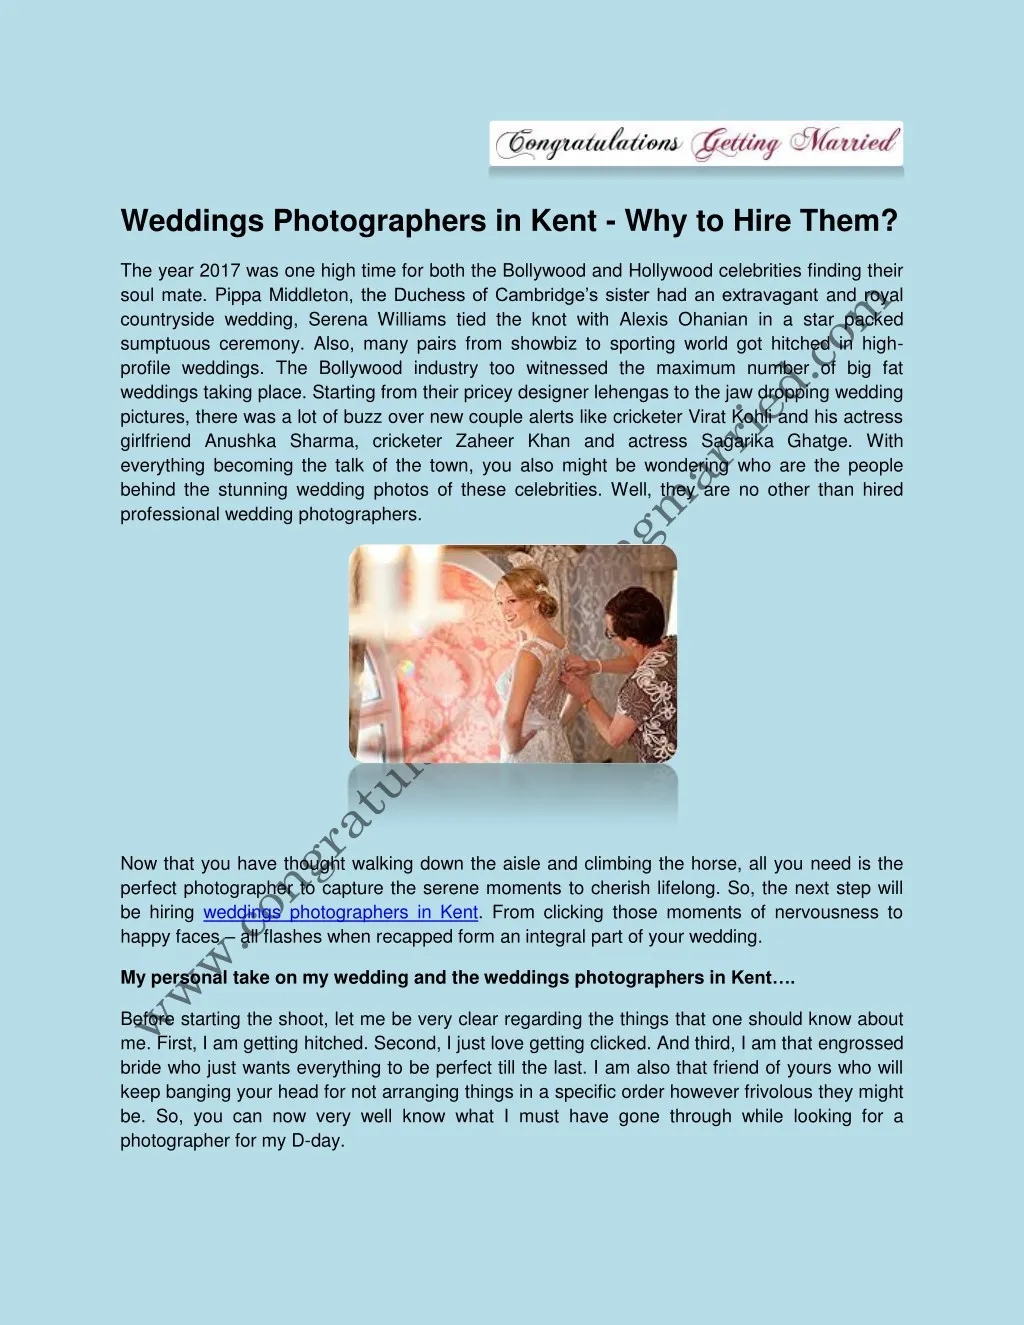 weddings photographers in kent why to hire them